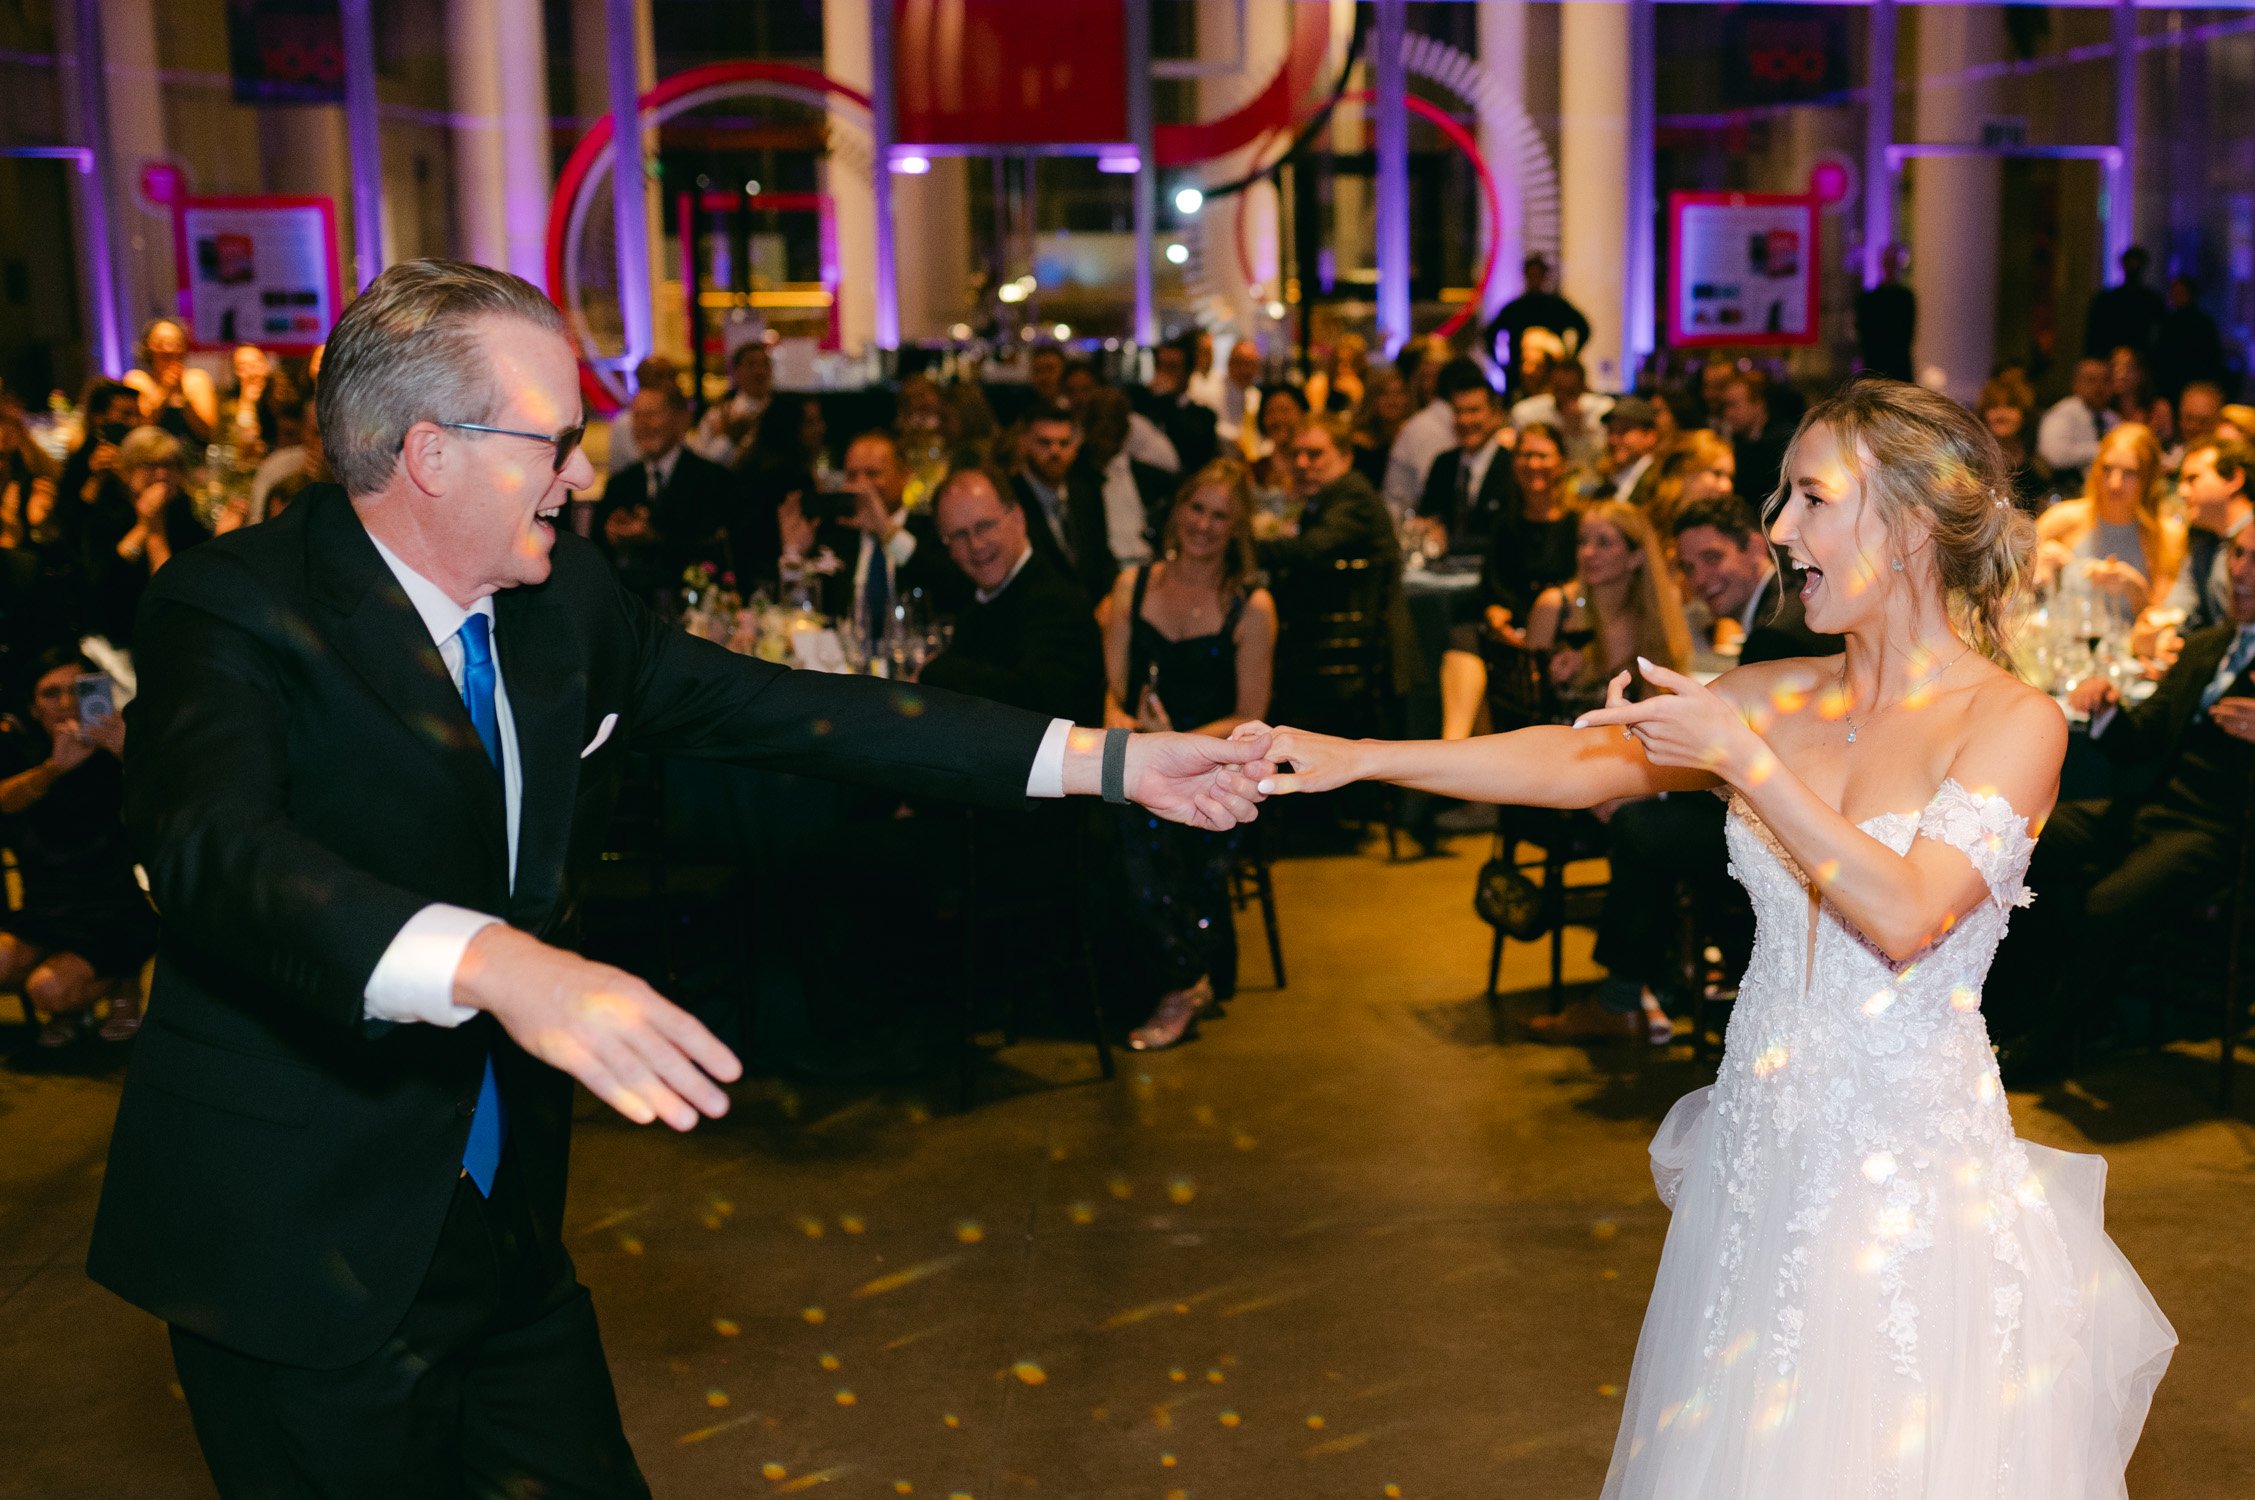 California academy of Sciences in San Francisco Wedding, photo of the bride and her dad dancing